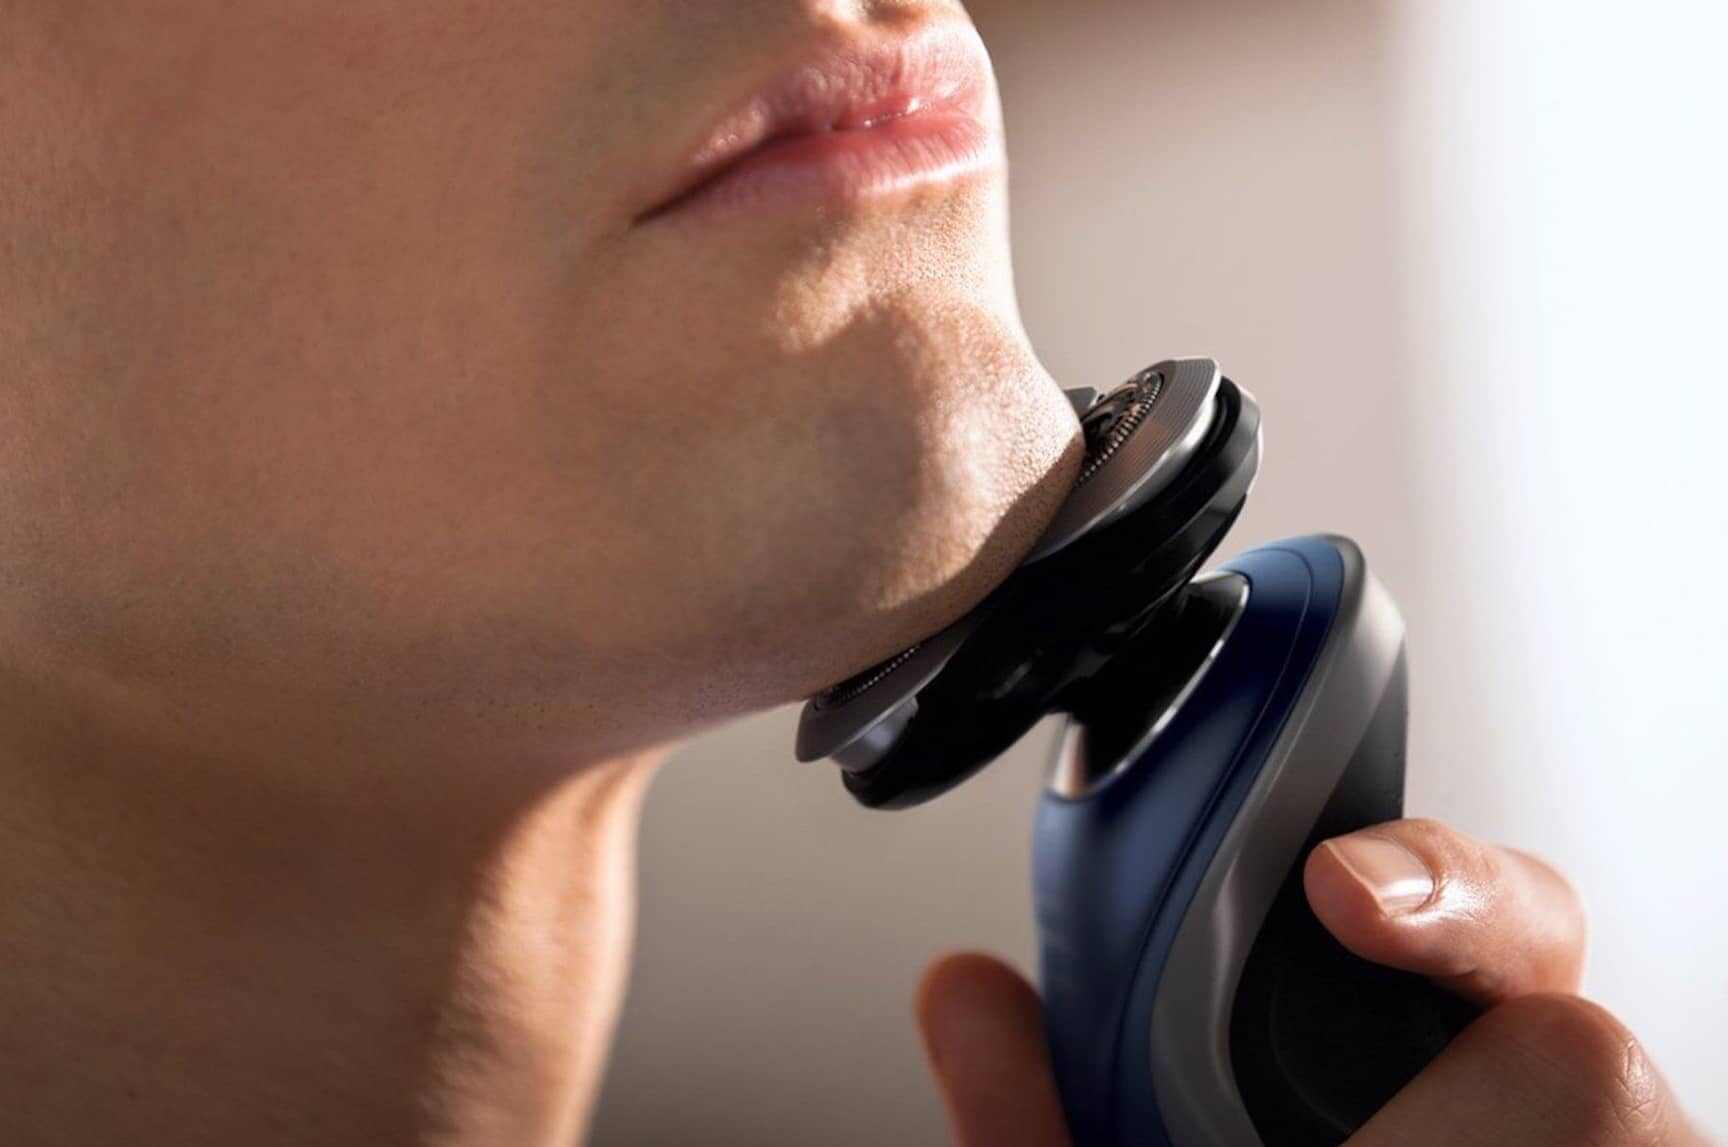 10 Best Rotary Shavers InDetail Reviews (Spring 2022)